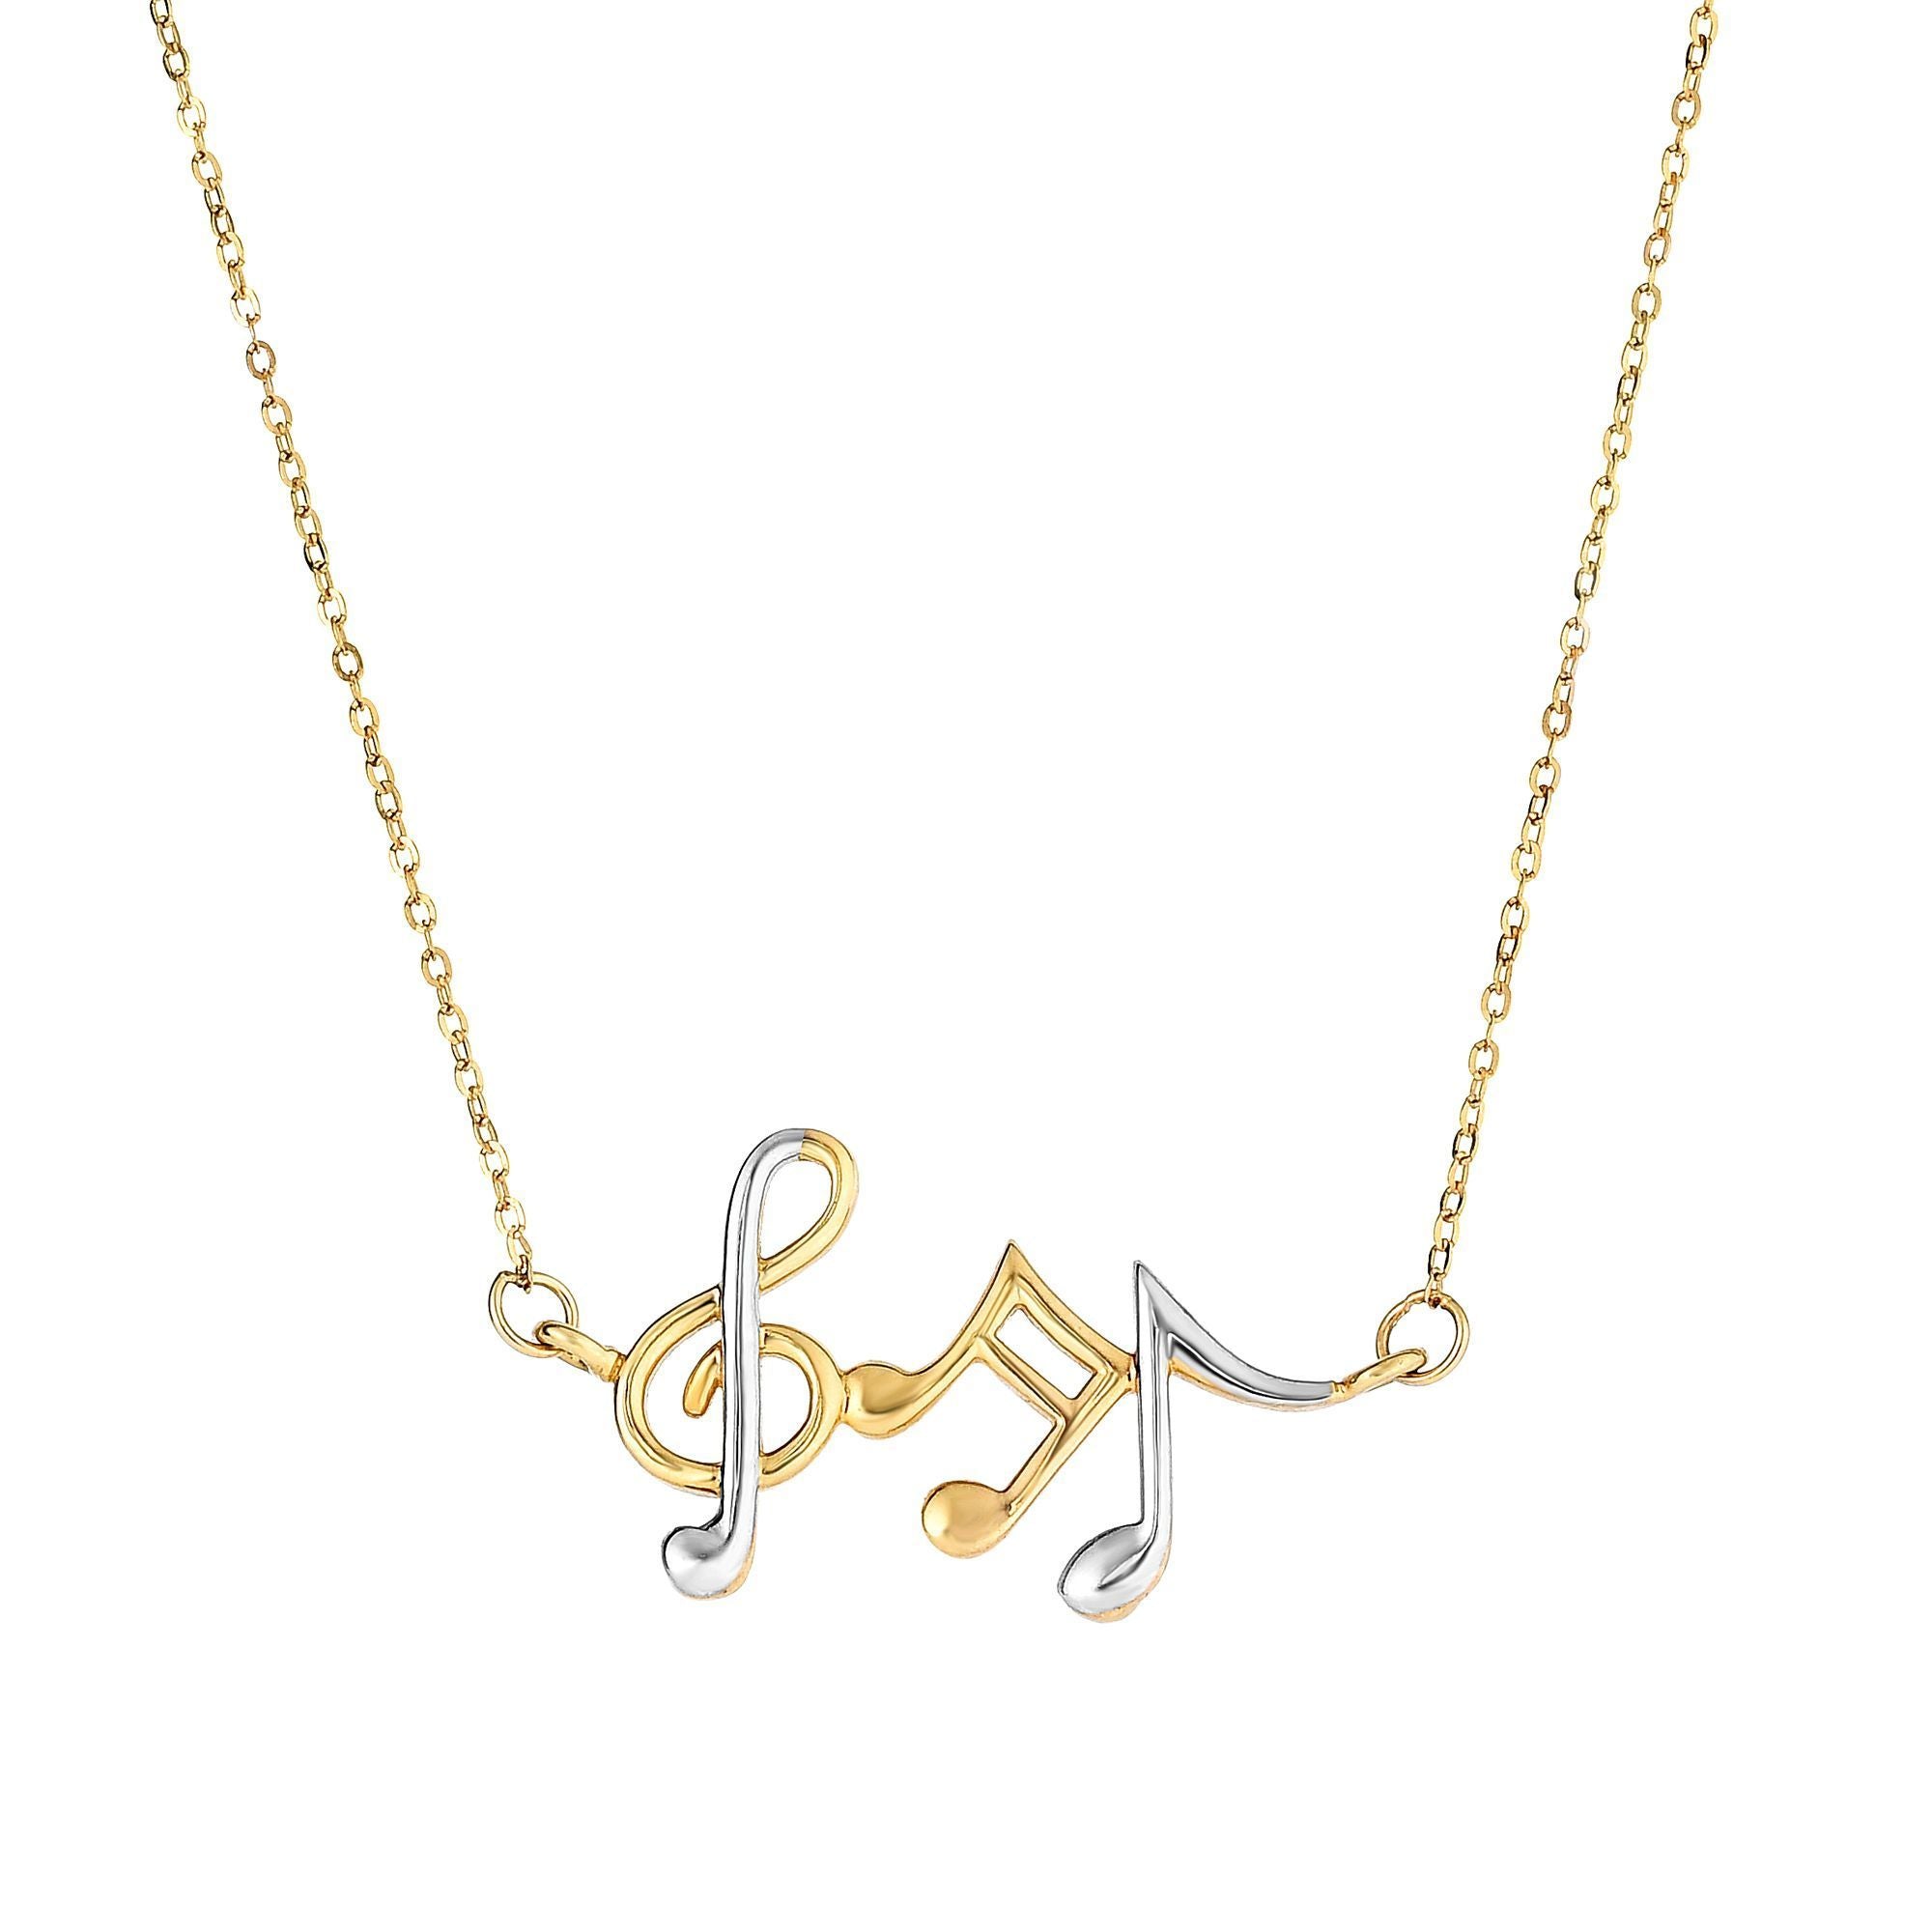 14k Minimalist Yellow Gold and White Gold Musical Note Charm Necklace